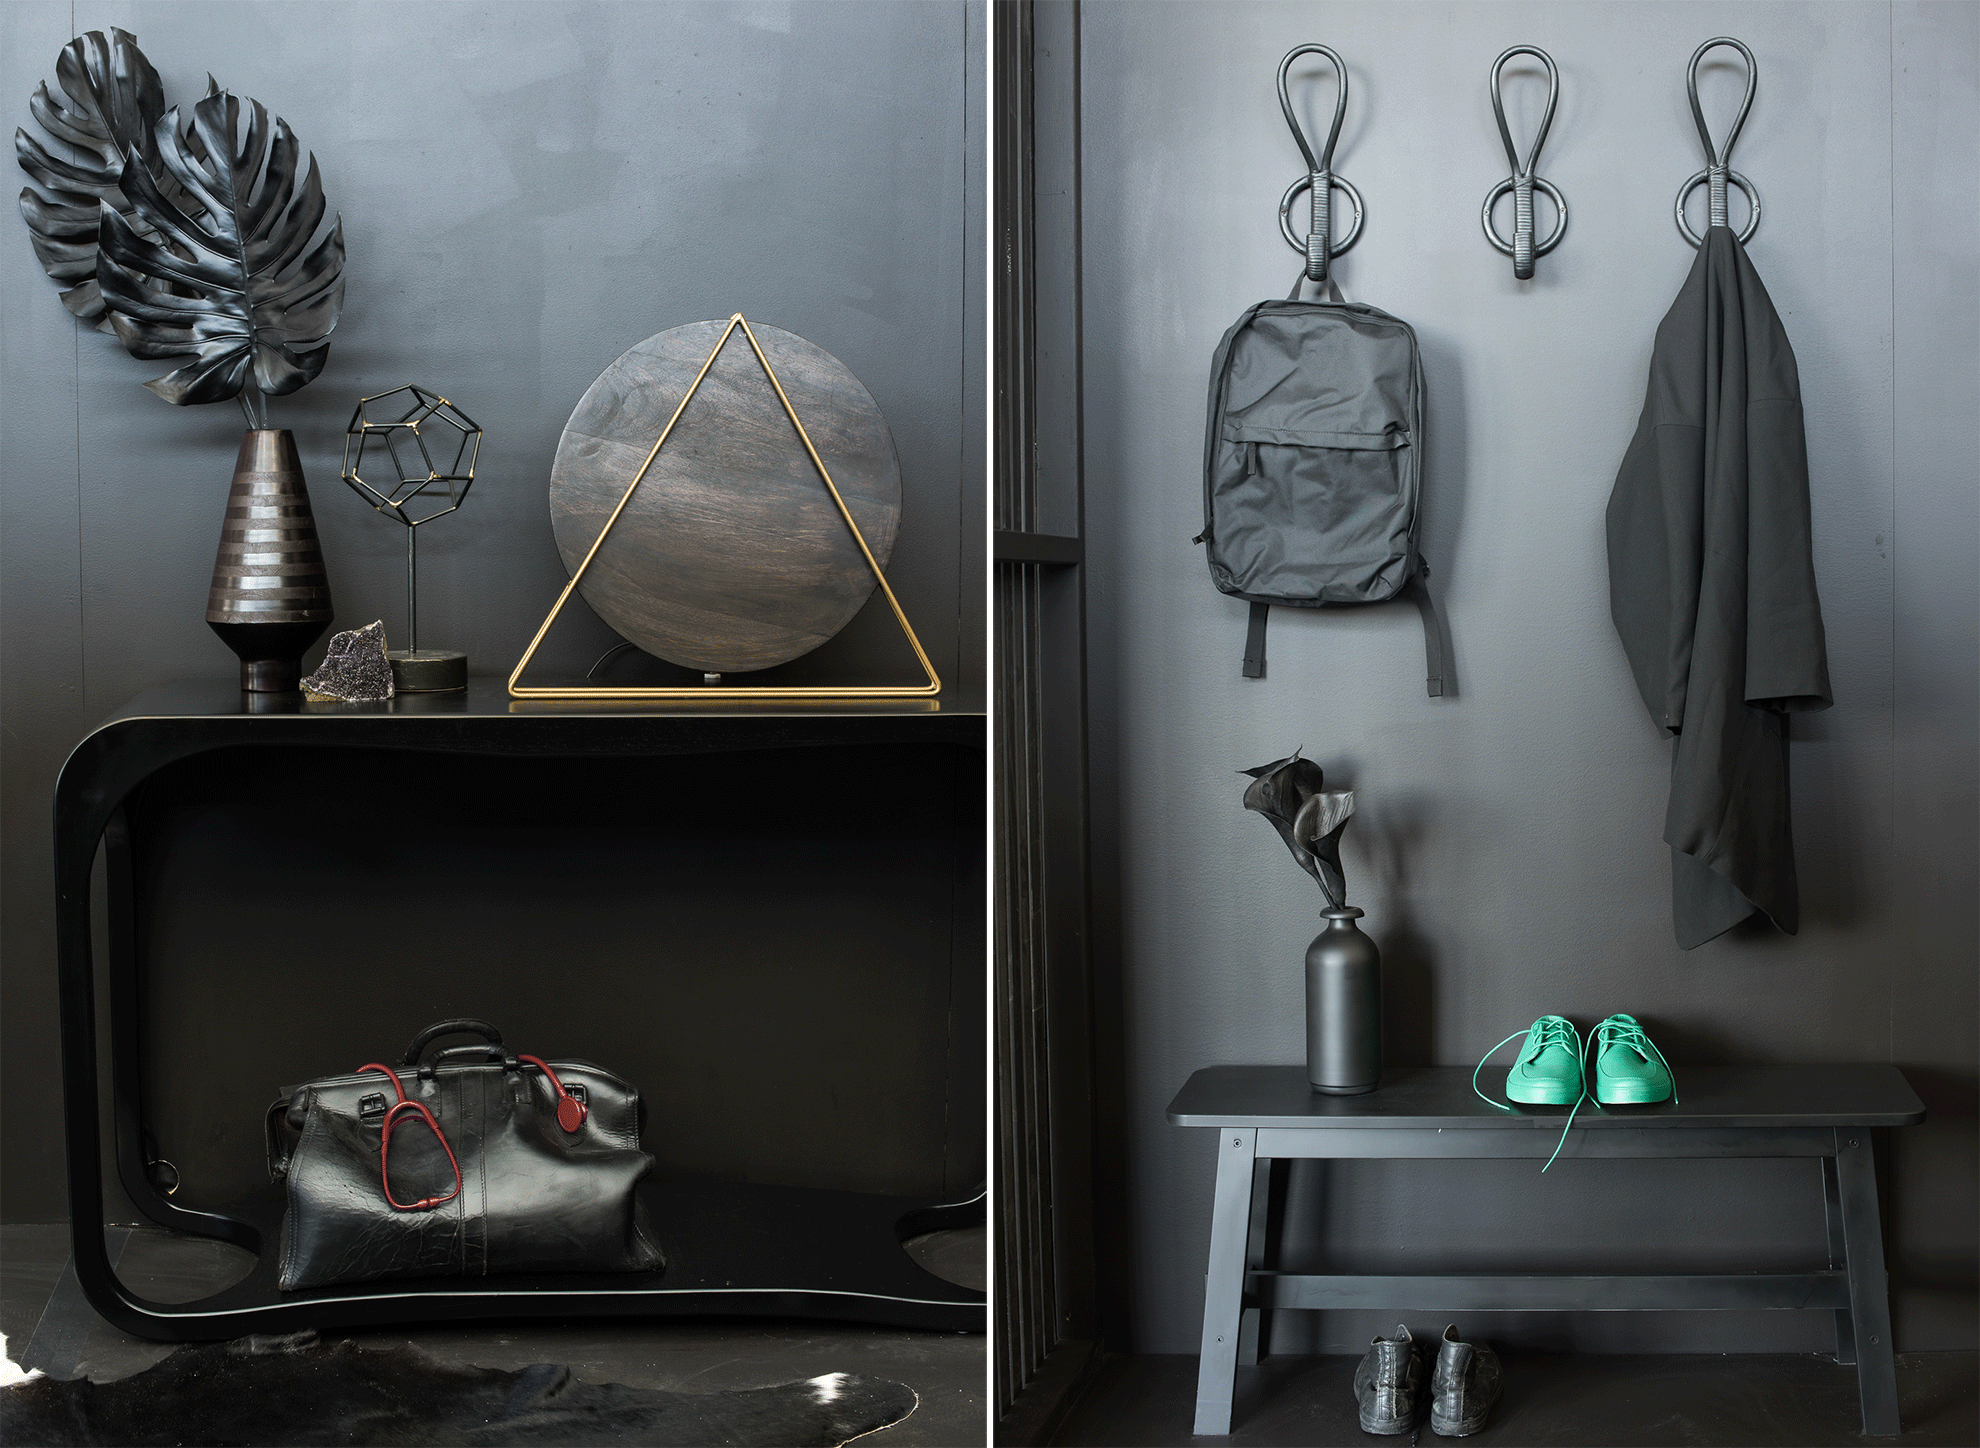 A single pair of green shoes sitting amongst black and gray home decor.